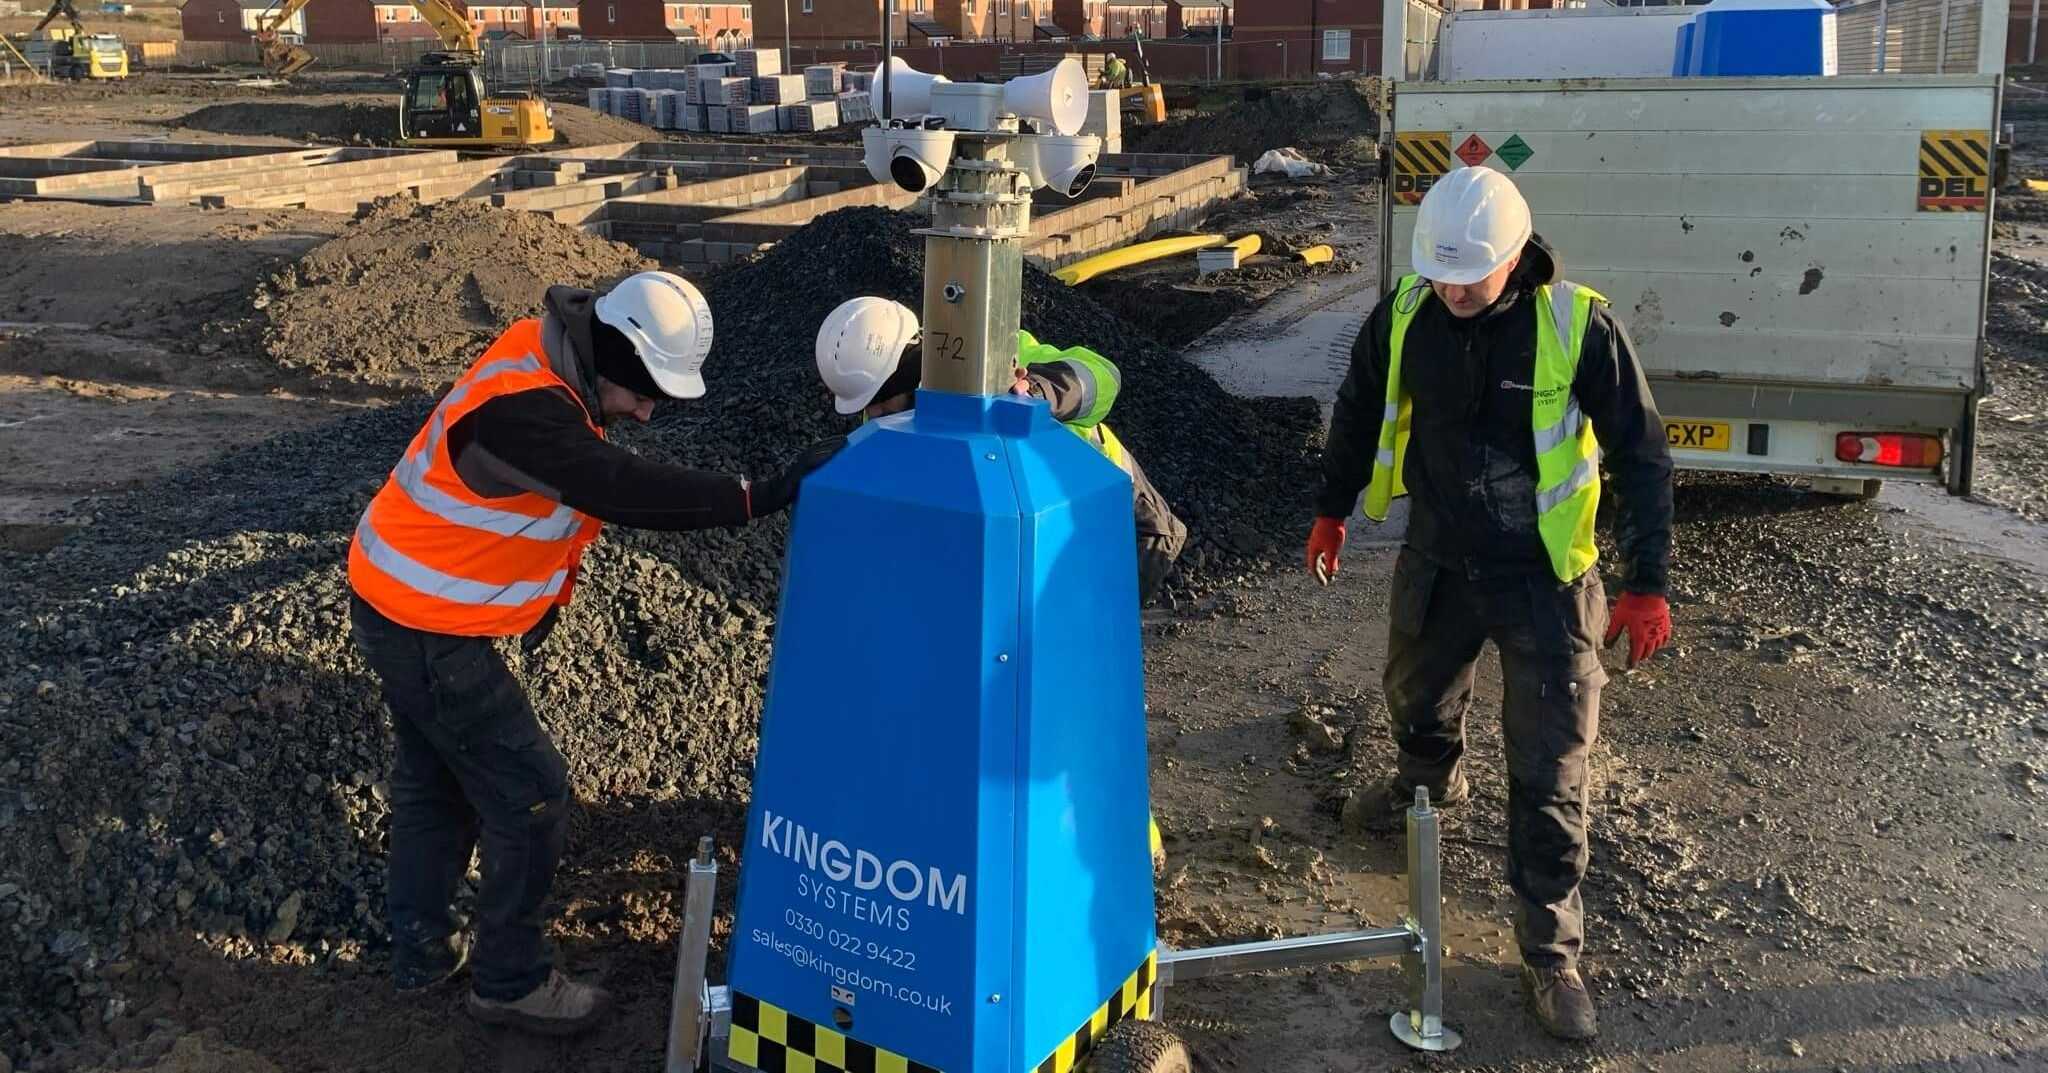 Kingdom Systems installing CCTV on construction site